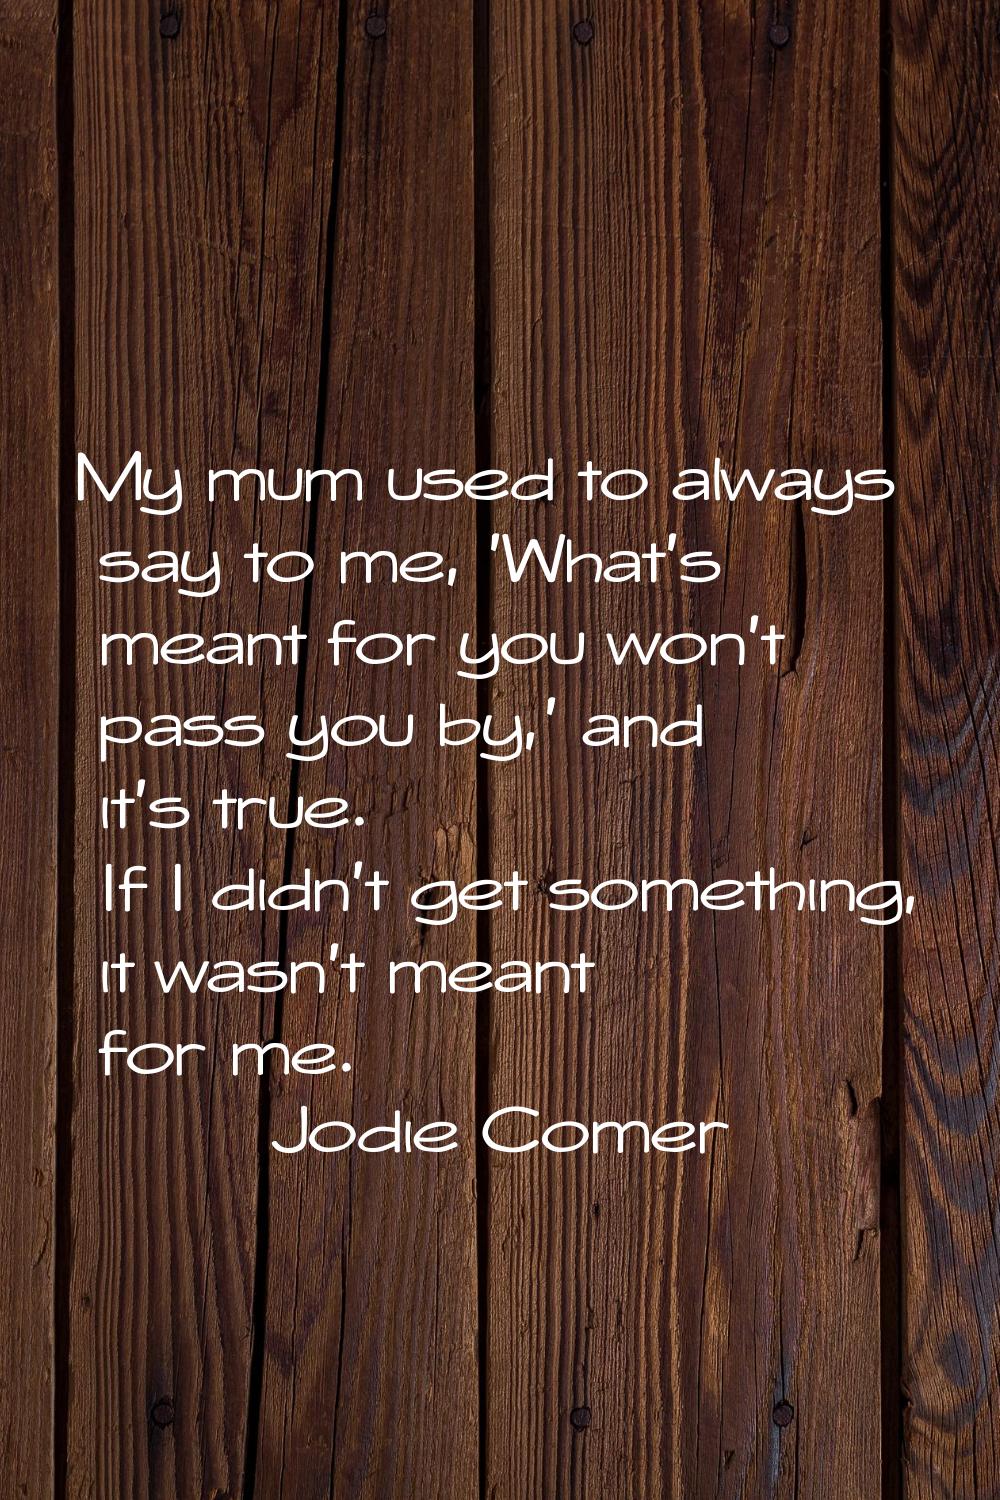 My mum used to always say to me, 'What's meant for you won't pass you by,' and it's true. If I didn